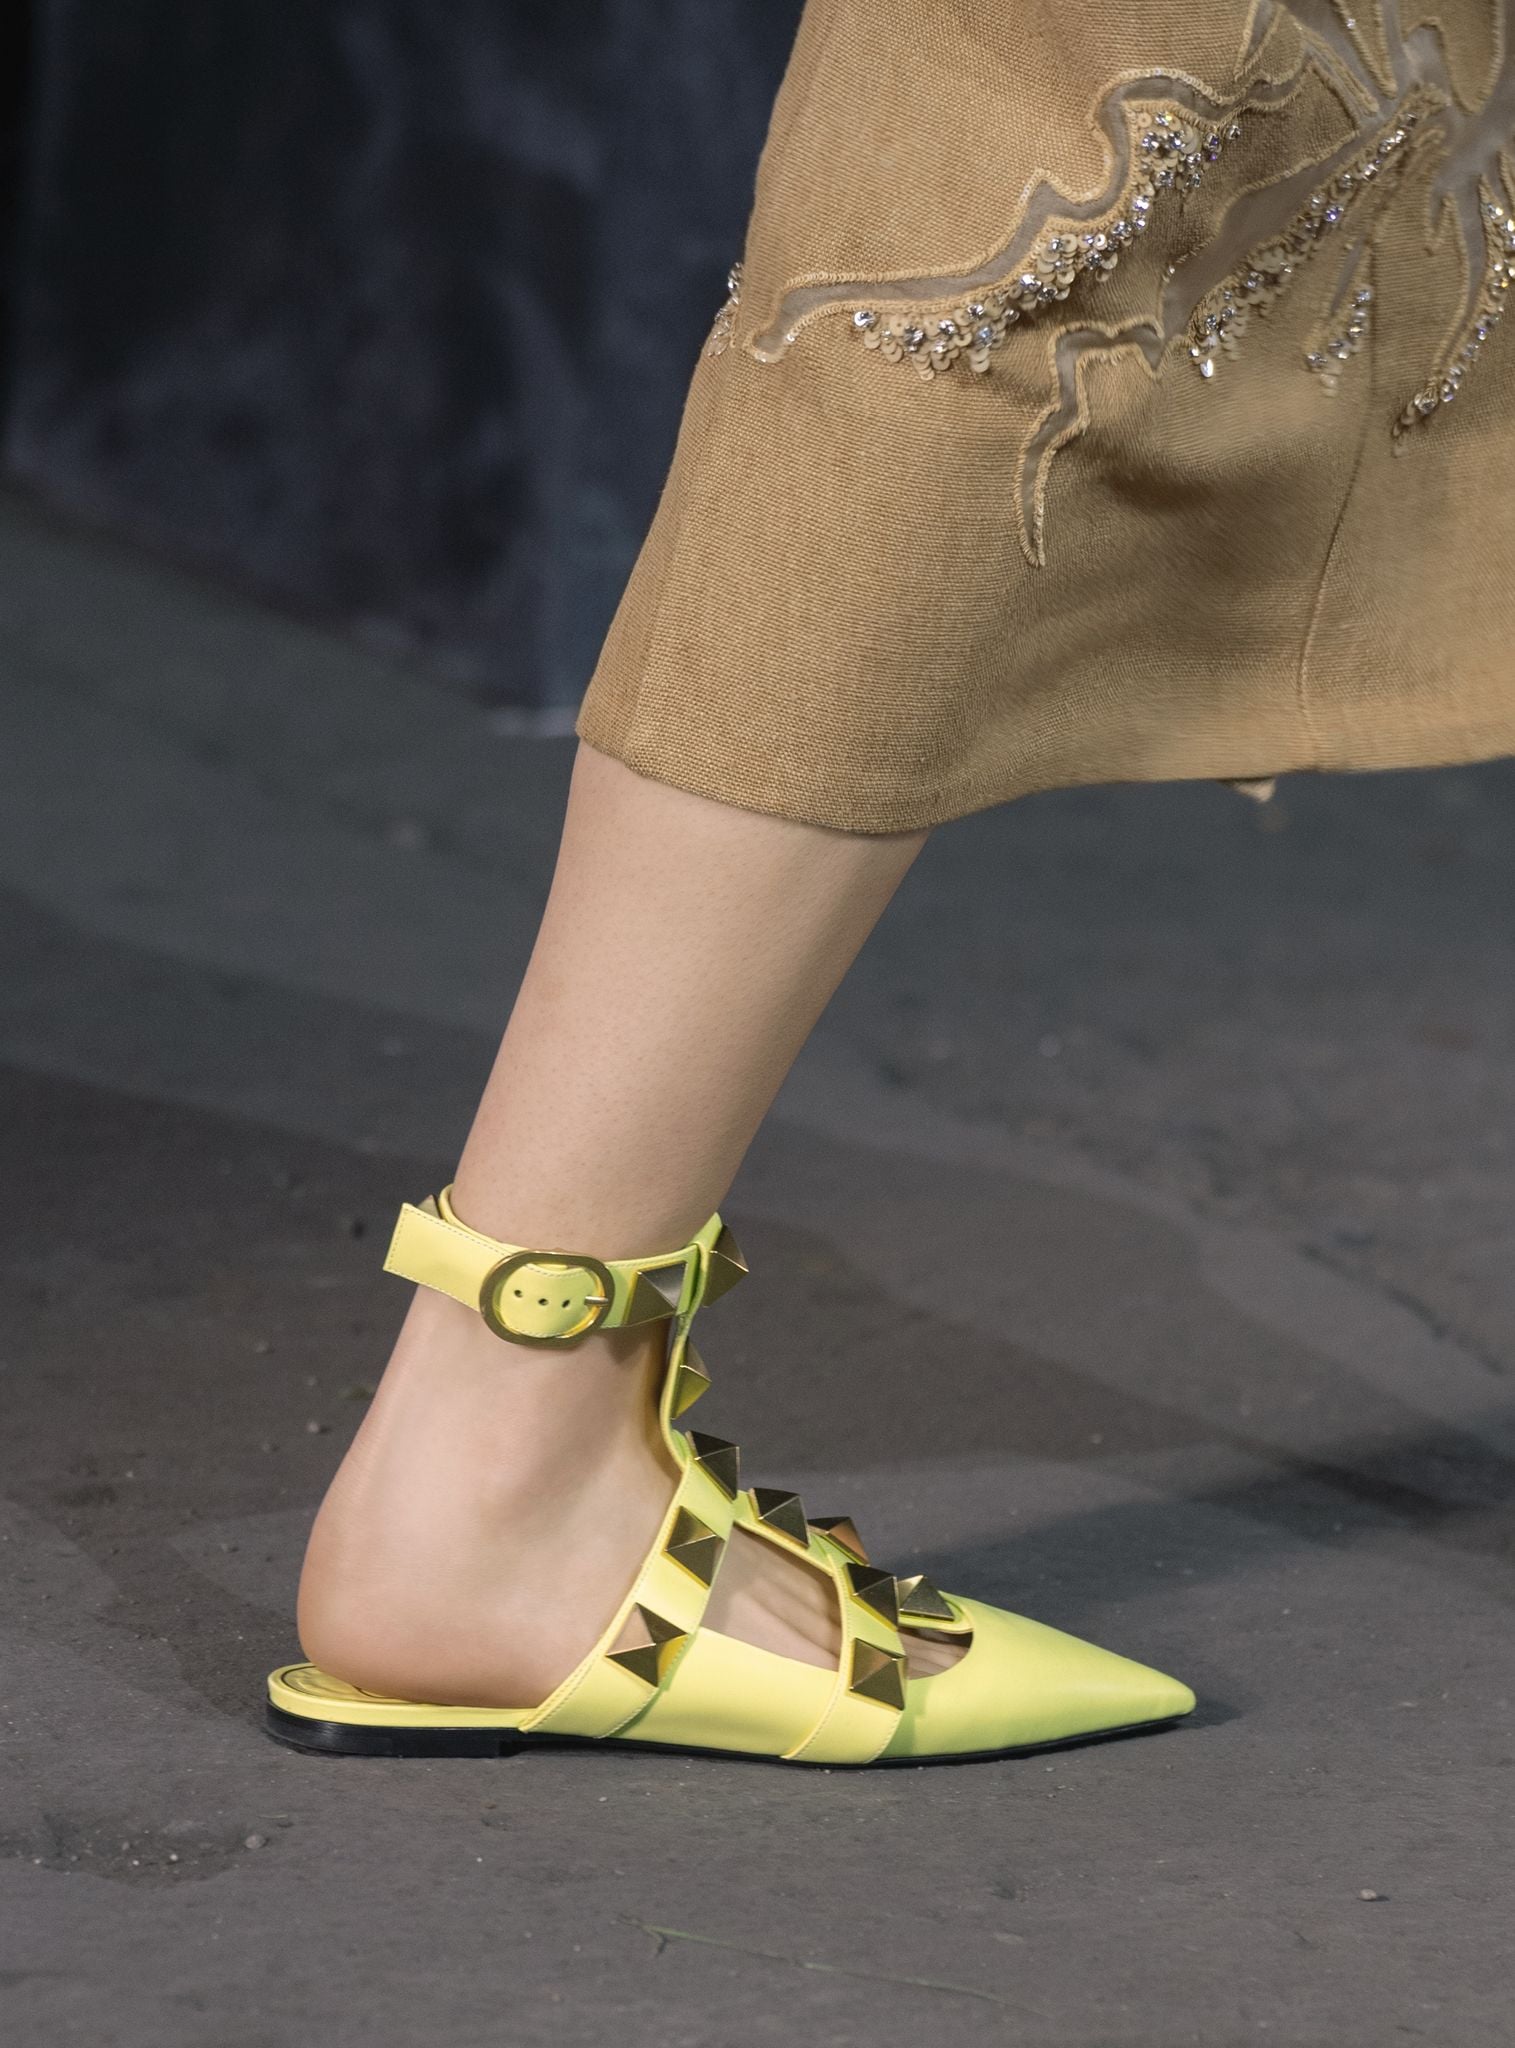 Shoes from the Valentino 2021 runway. | 8 Shoe Trends Straight the That Are Here For the Summer | POPSUGAR Fashion Photo 25